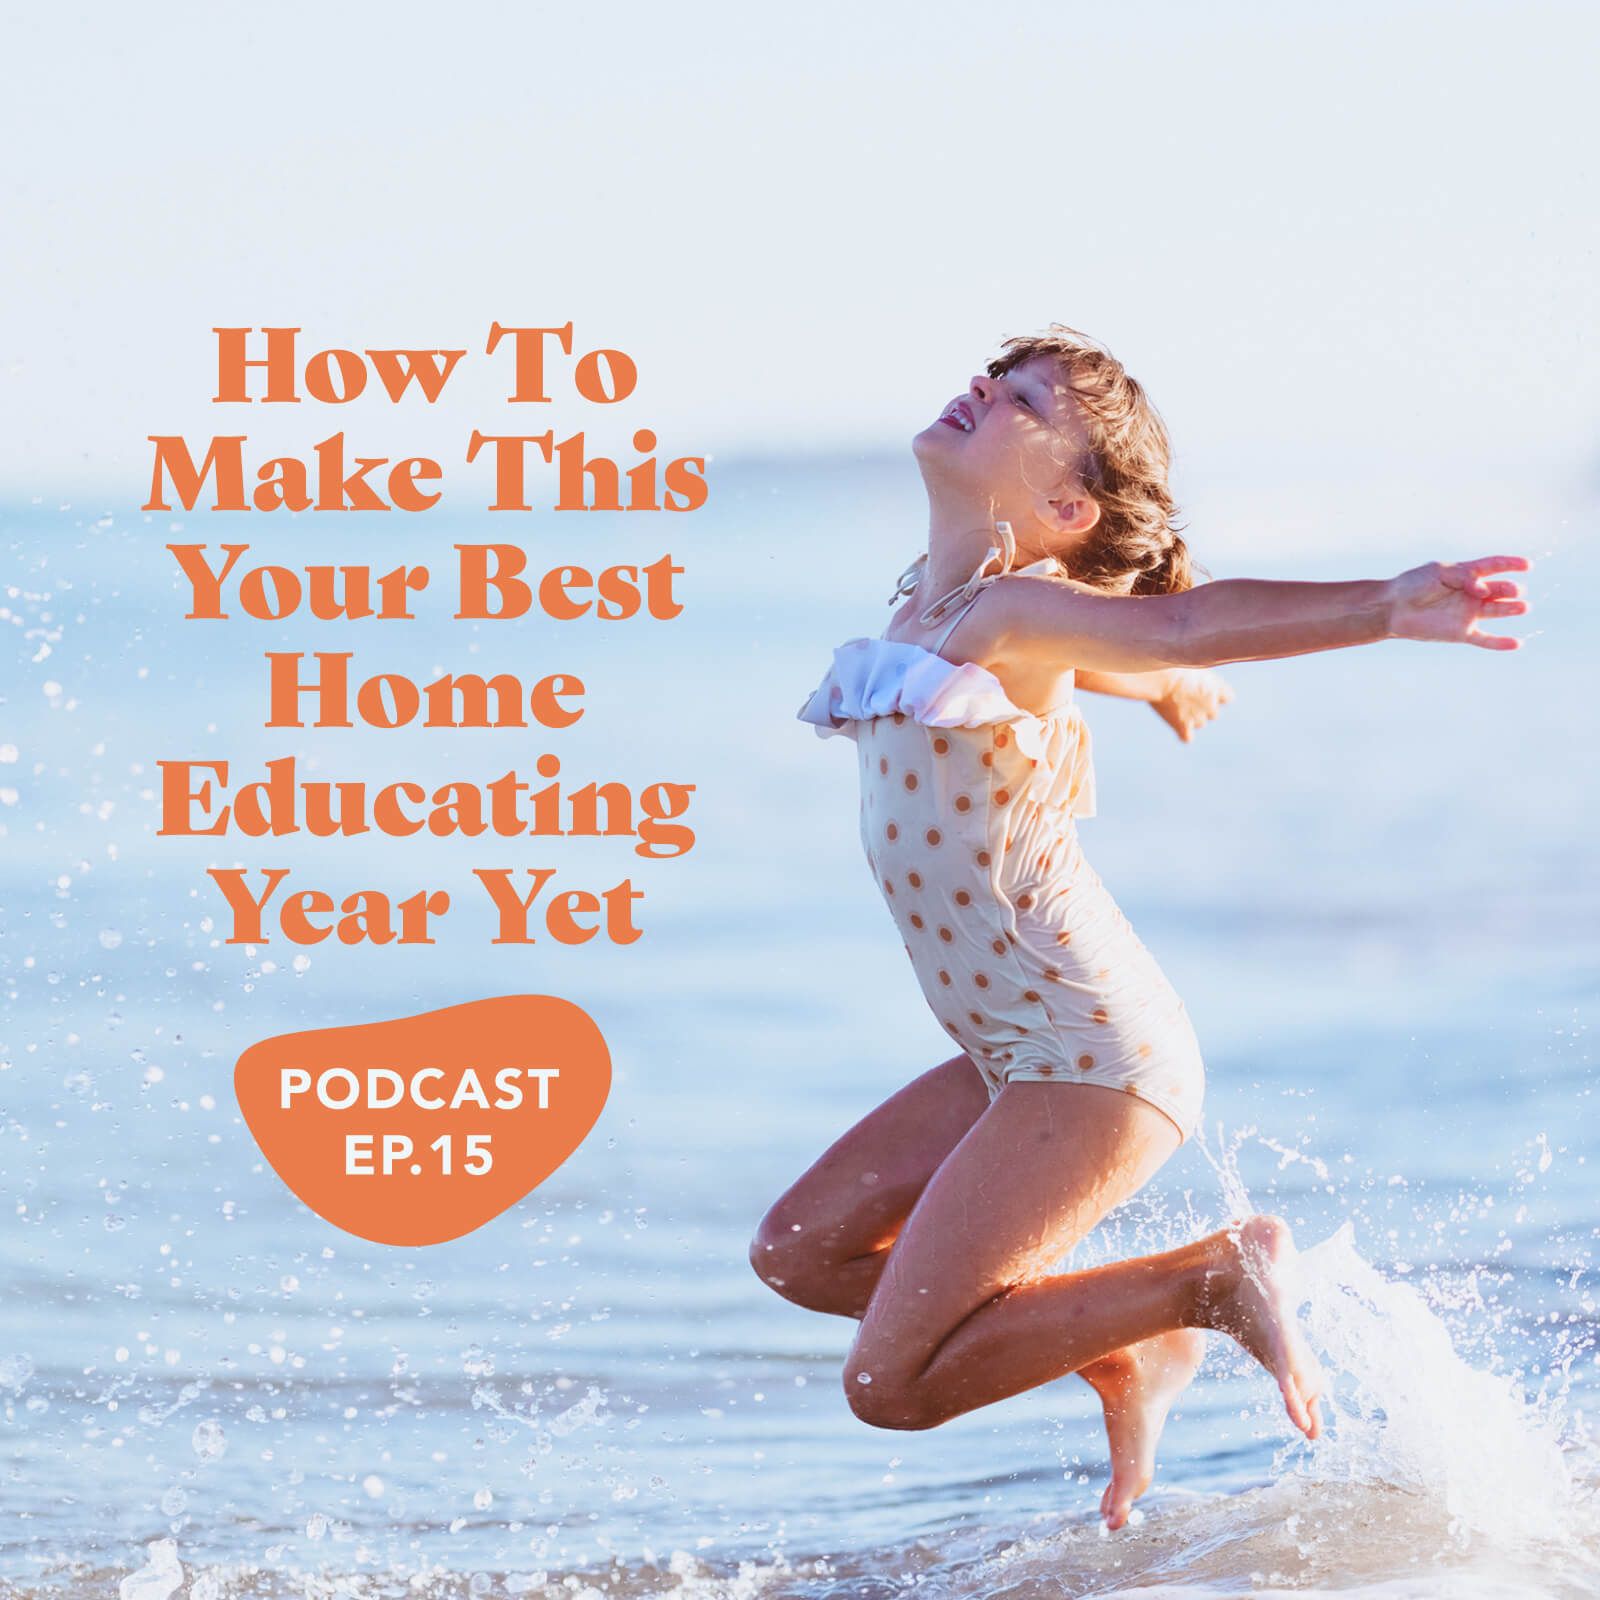 Episode 15: How To Make This Your Best Home Educating Year Yet